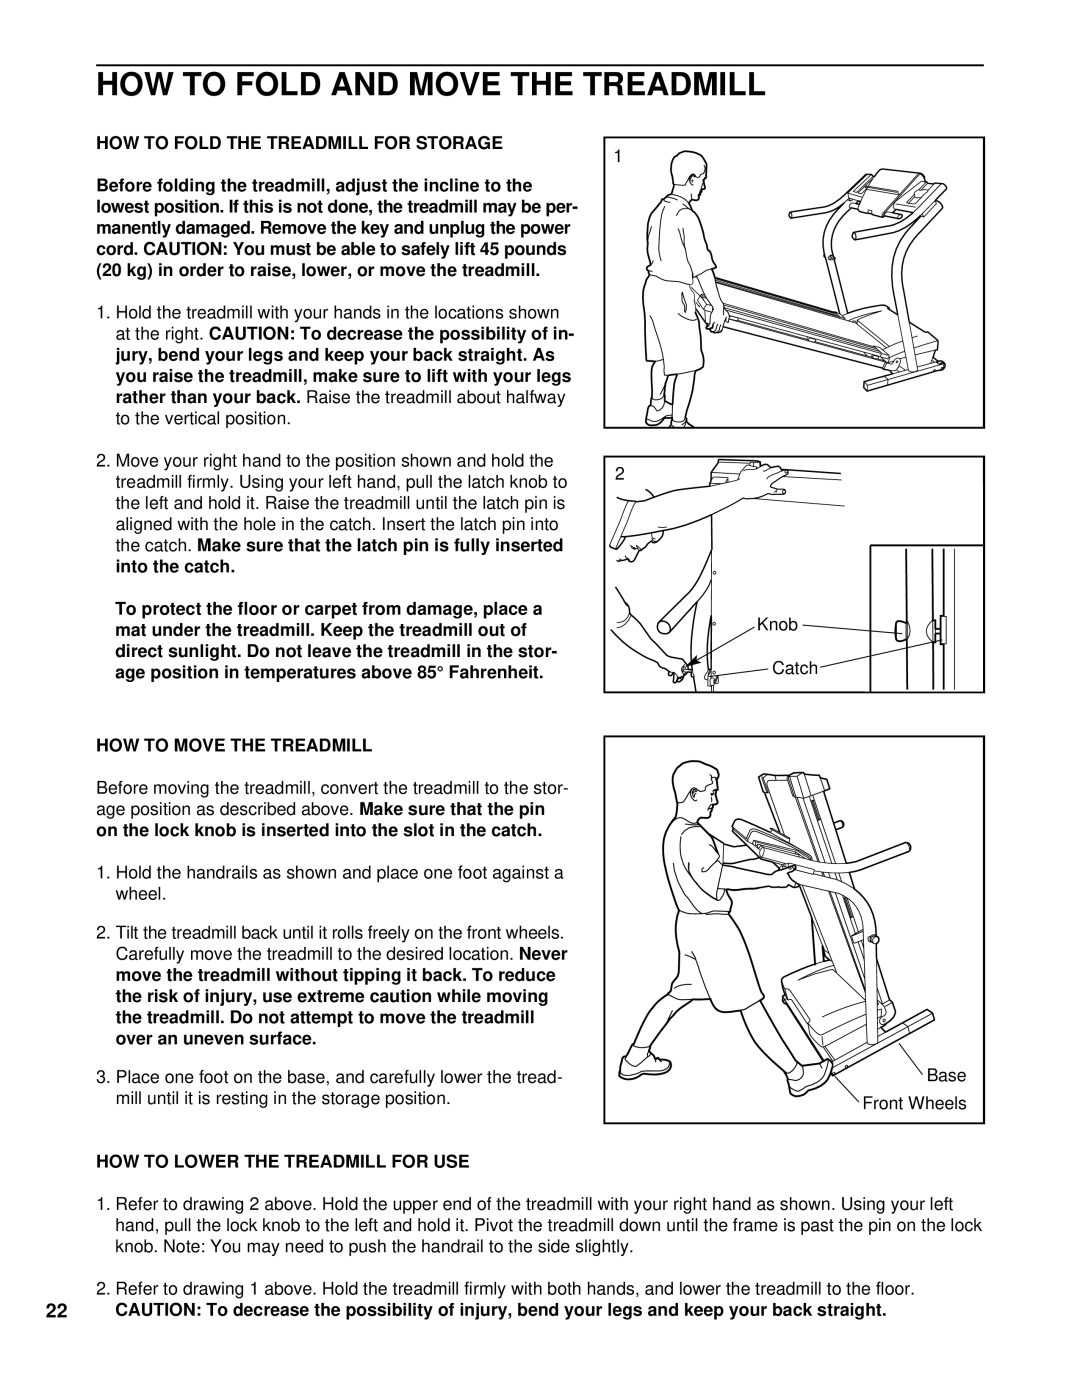 NordicTrack NTTL09994 How To Fold And Move The Treadmill, How To Fold The Treadmill For Storage, How To Move The Treadmill 